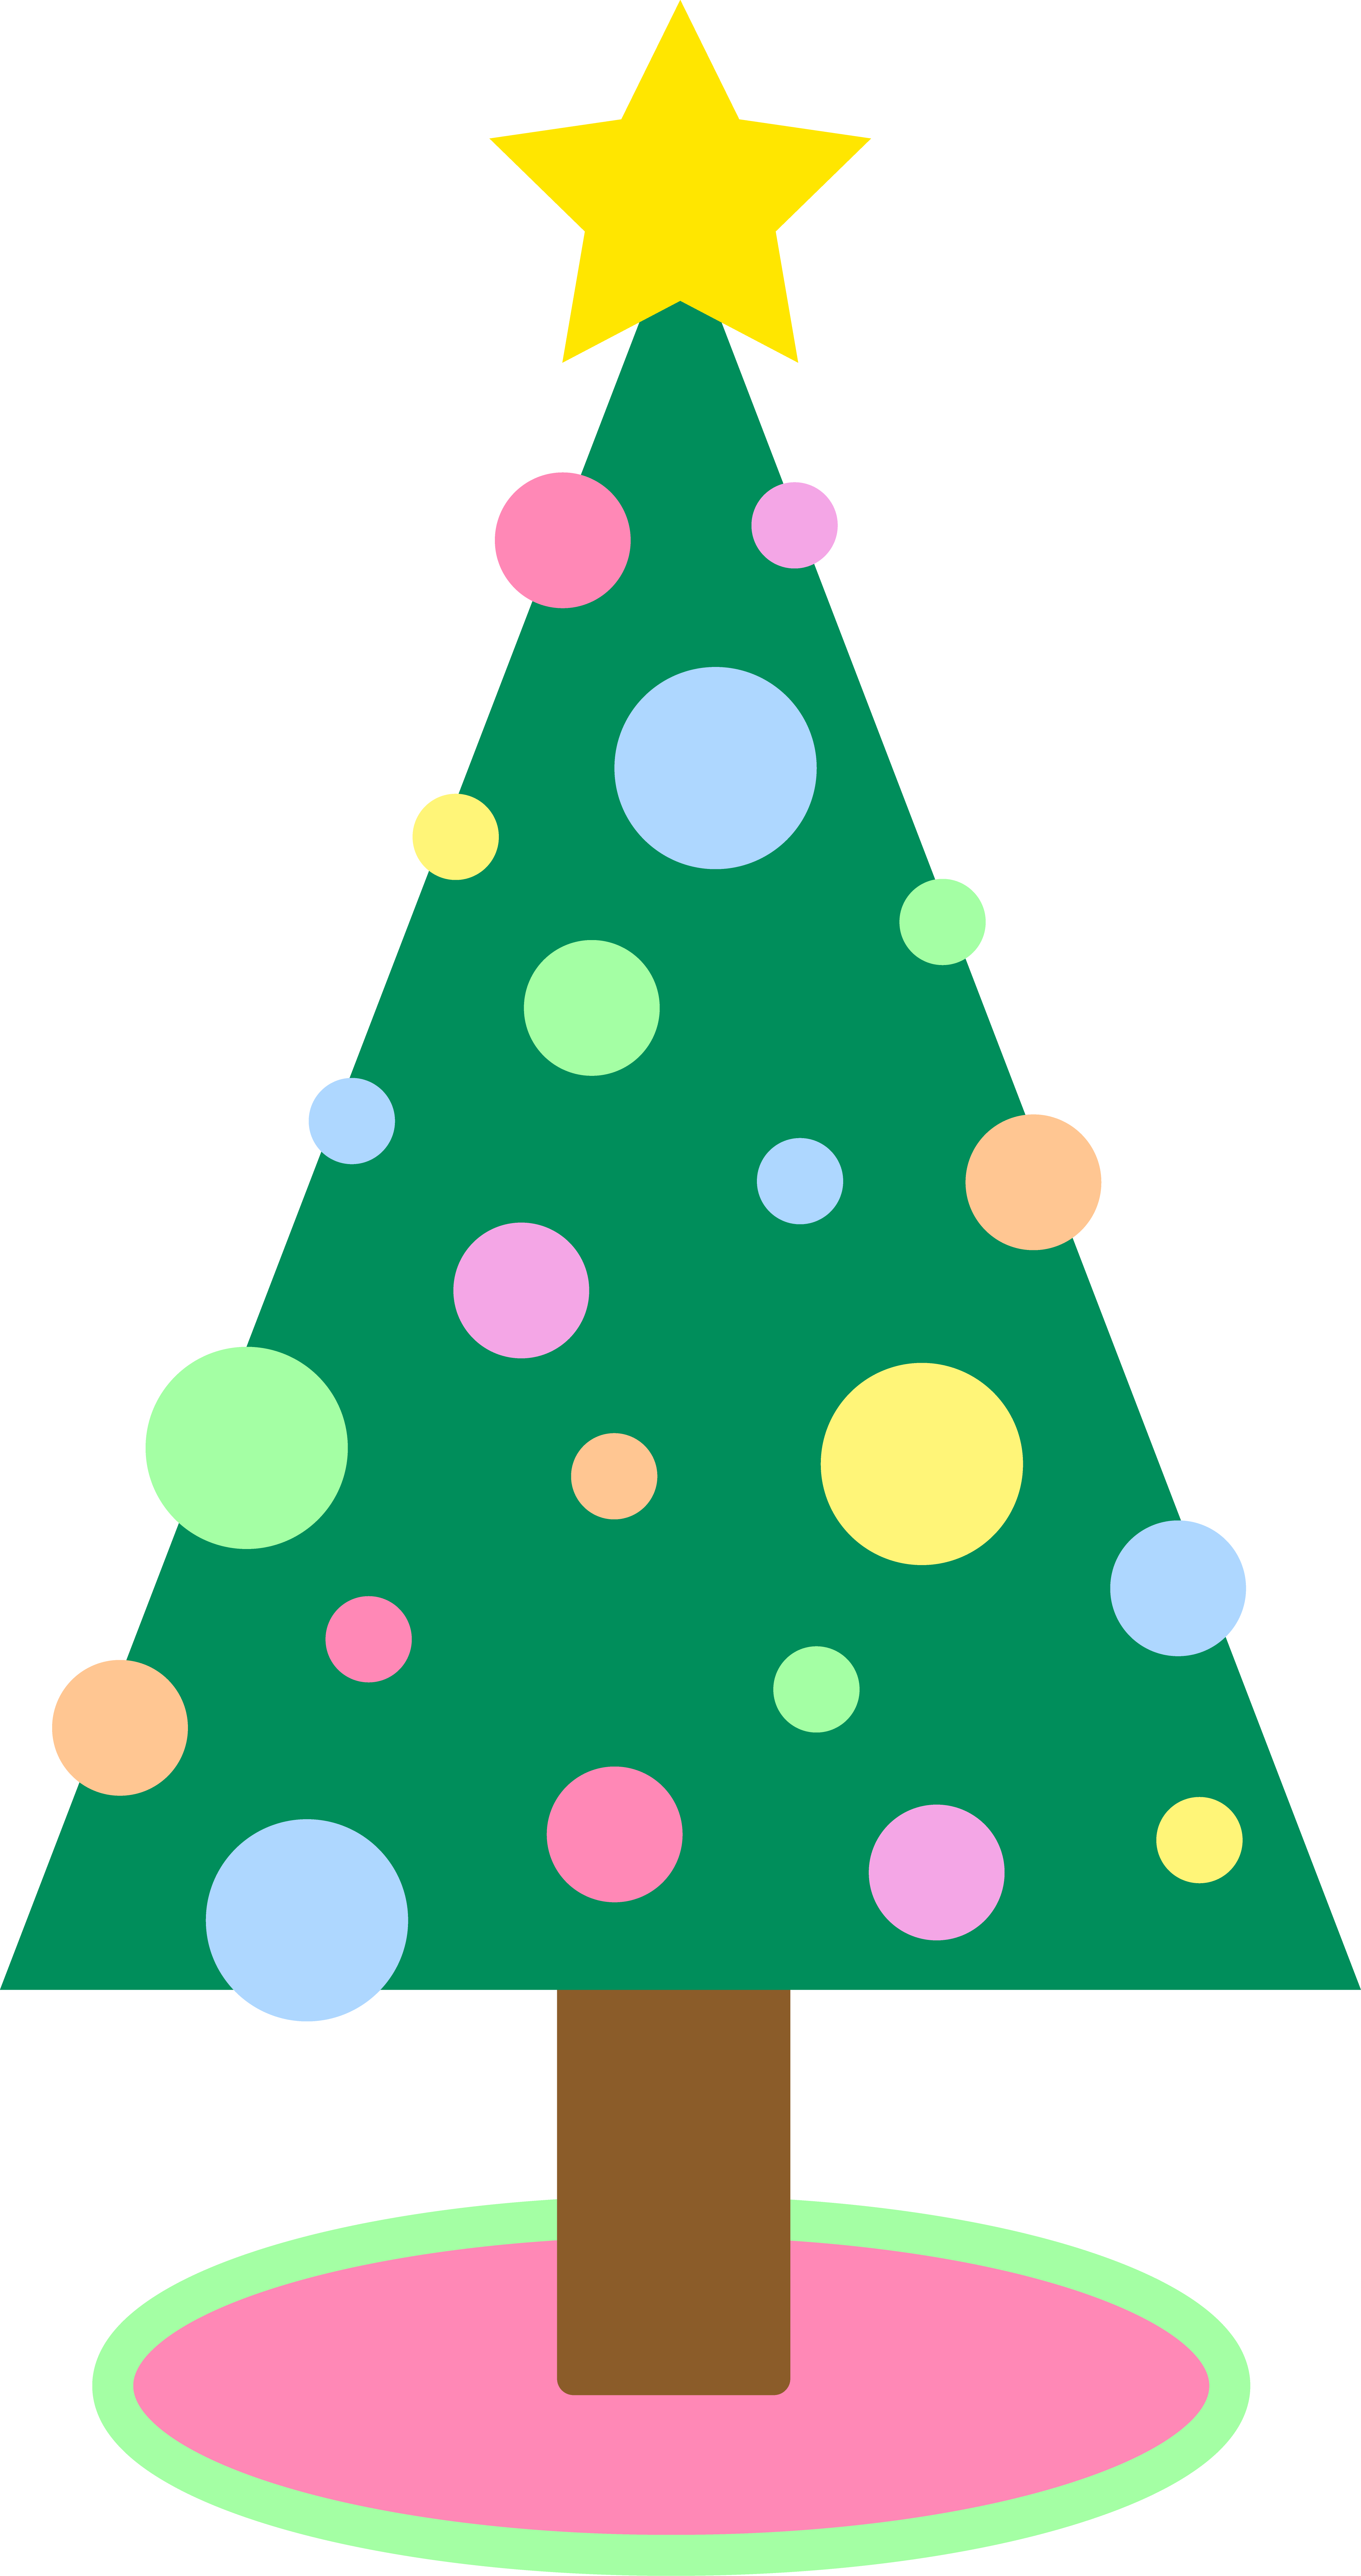 free clipart for december holidays - photo #30